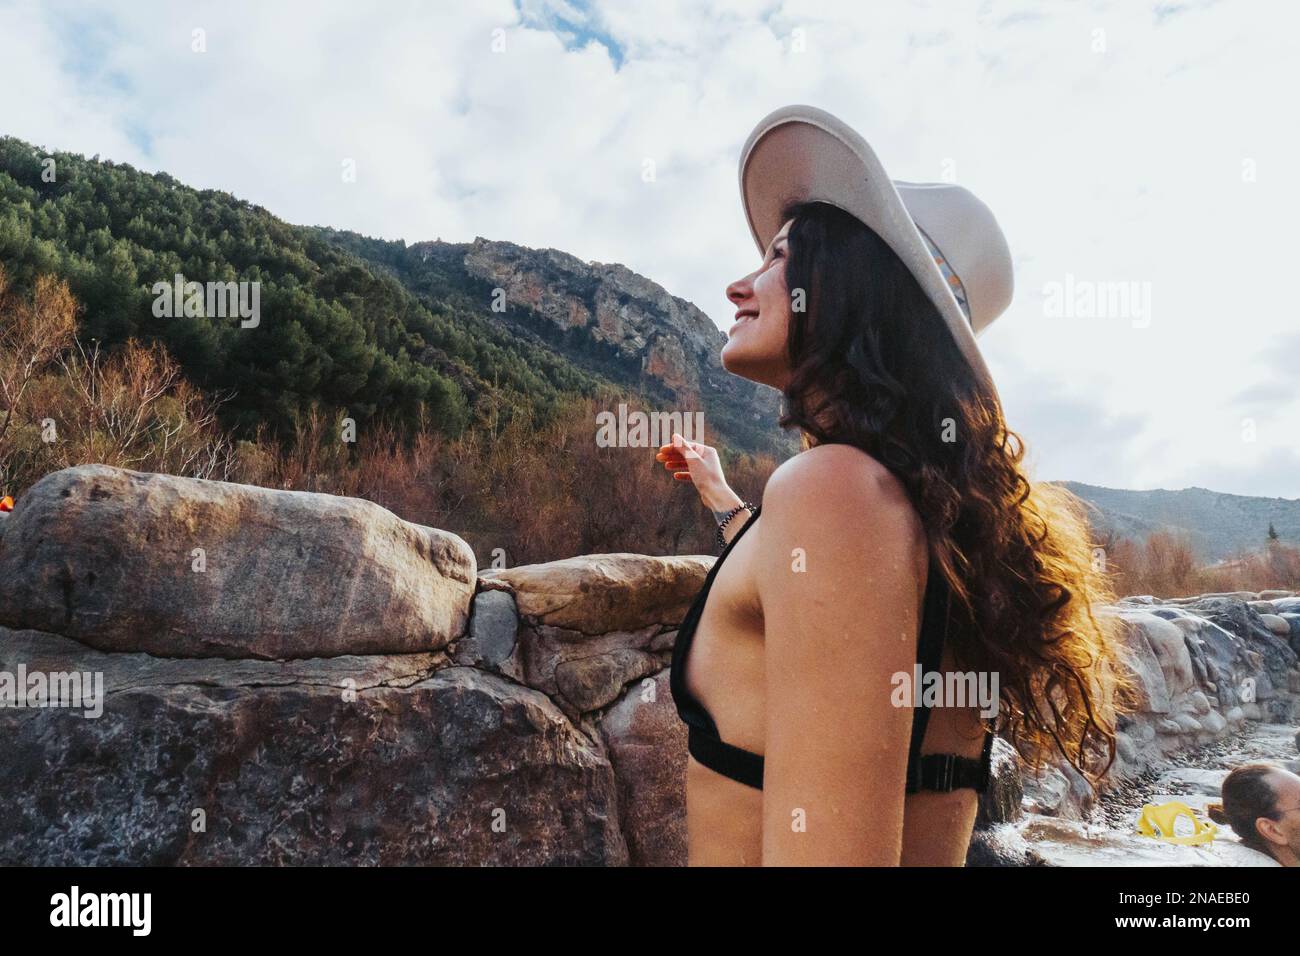 woman with swimsuit and hat in natural hot springs against nature Stock Photo